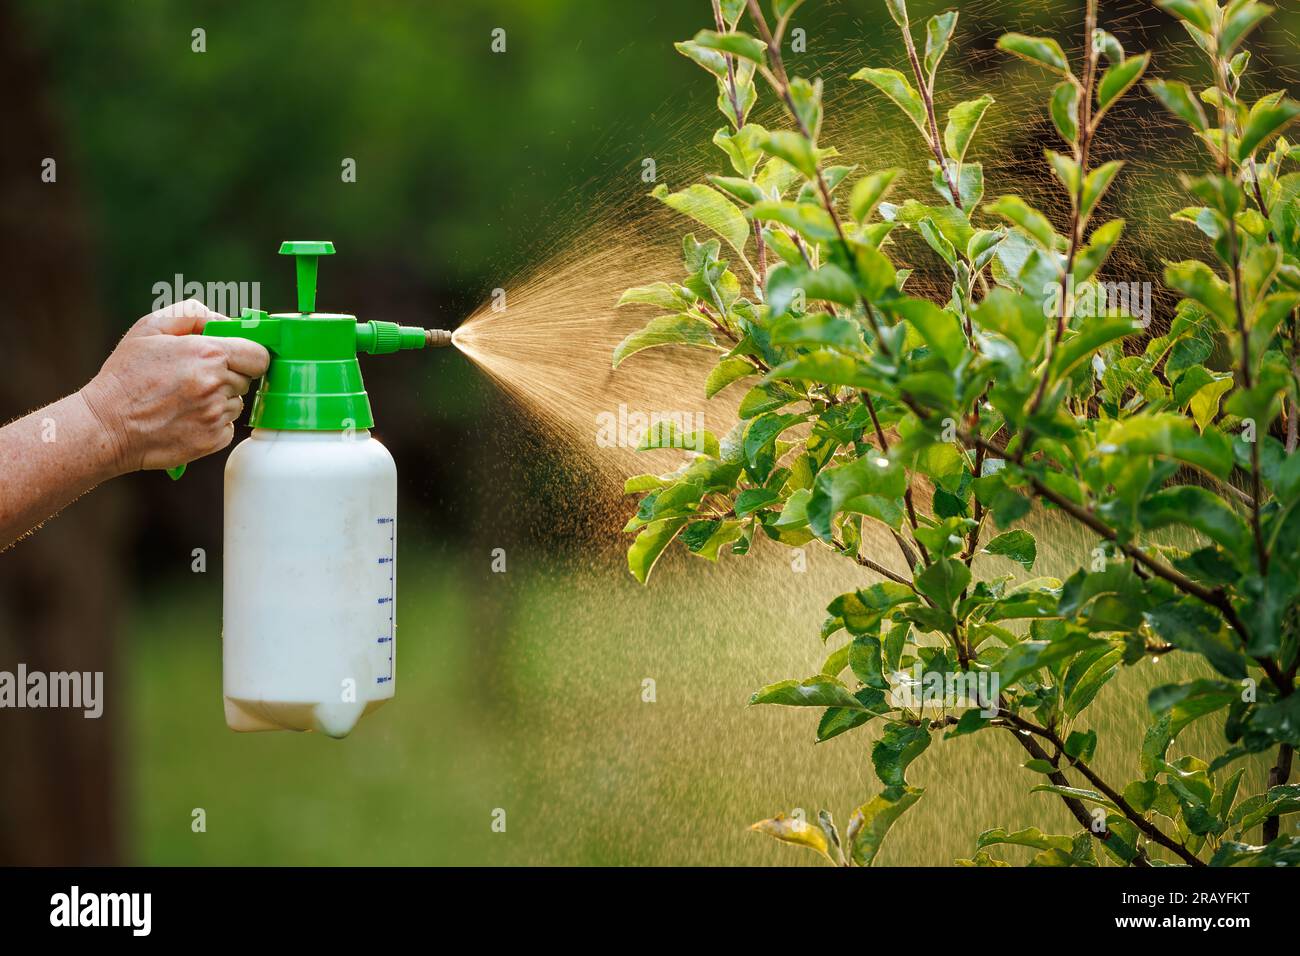 Spraying tree with insecticide against pests and diseases in the garden using spray bottle Stock Photo